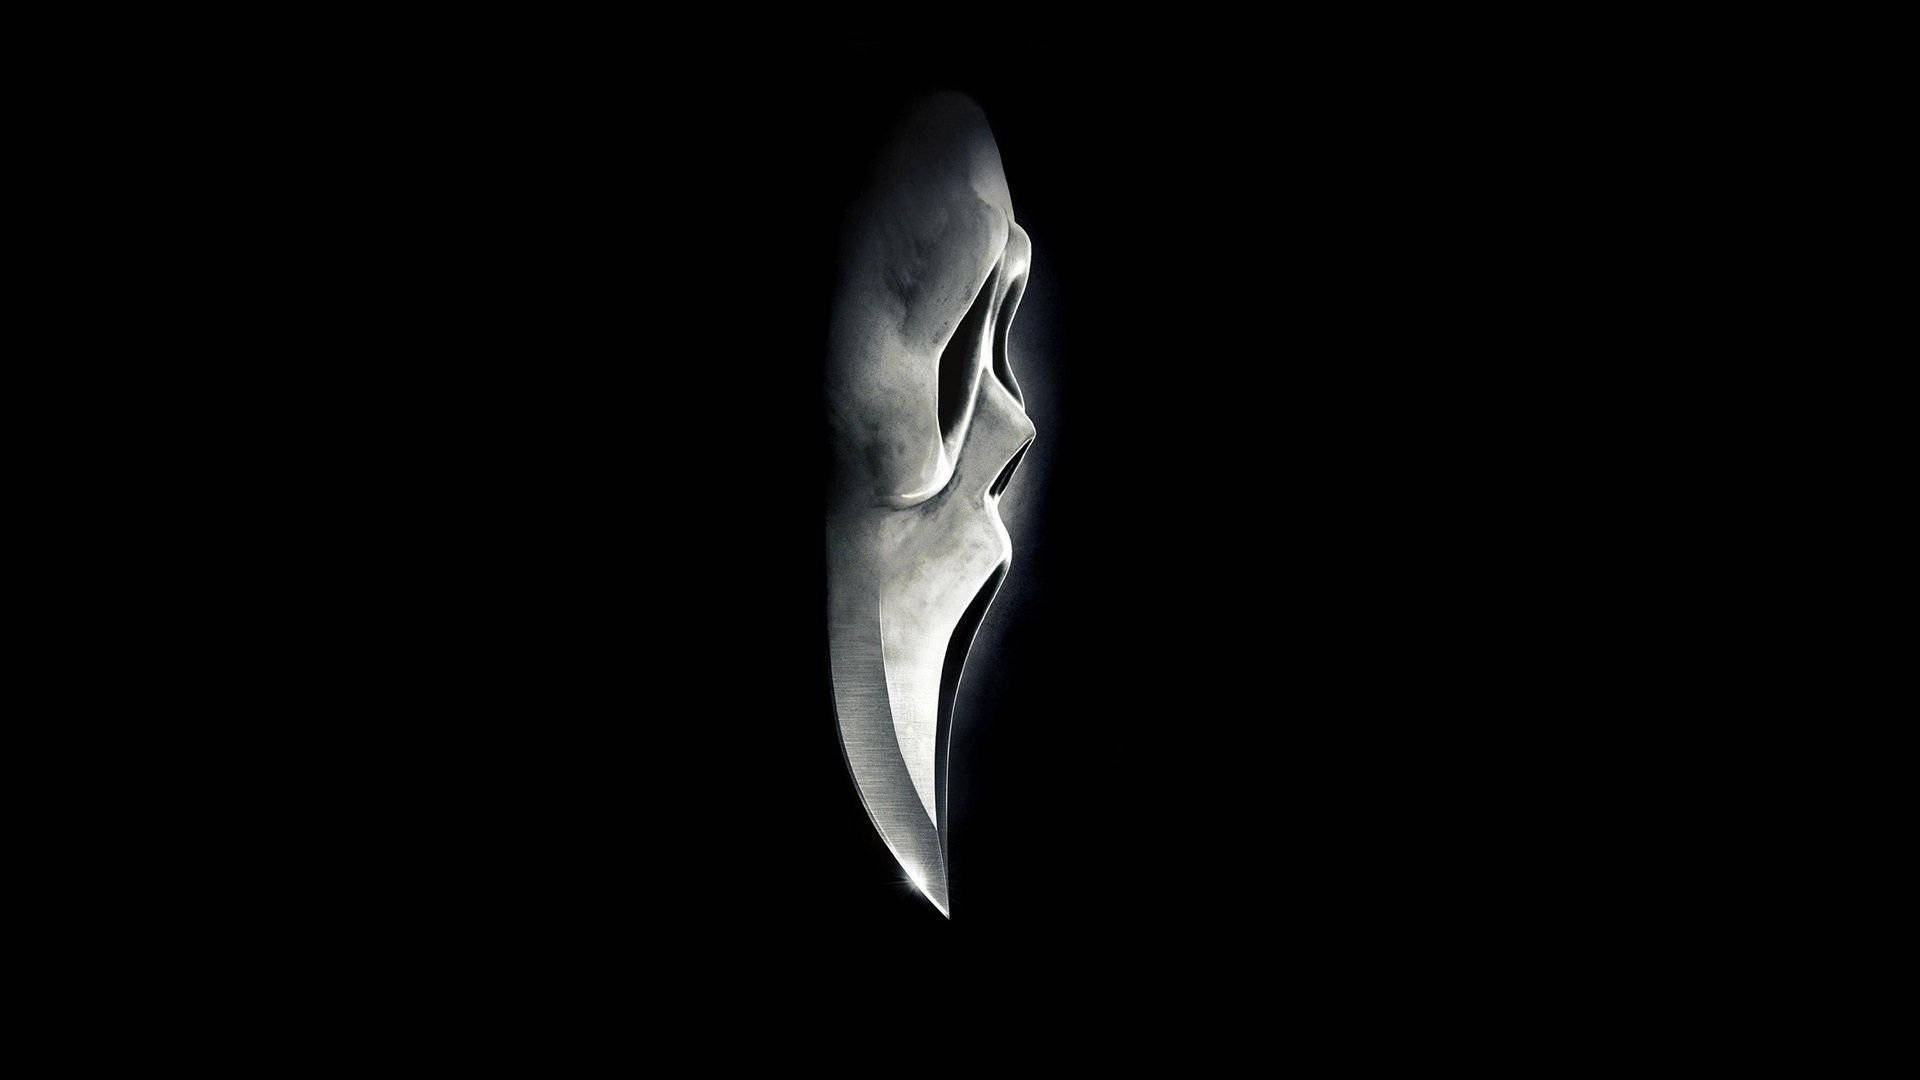 Fear Strikes Deep - The Infamous Ghostface From The Scream Series Background